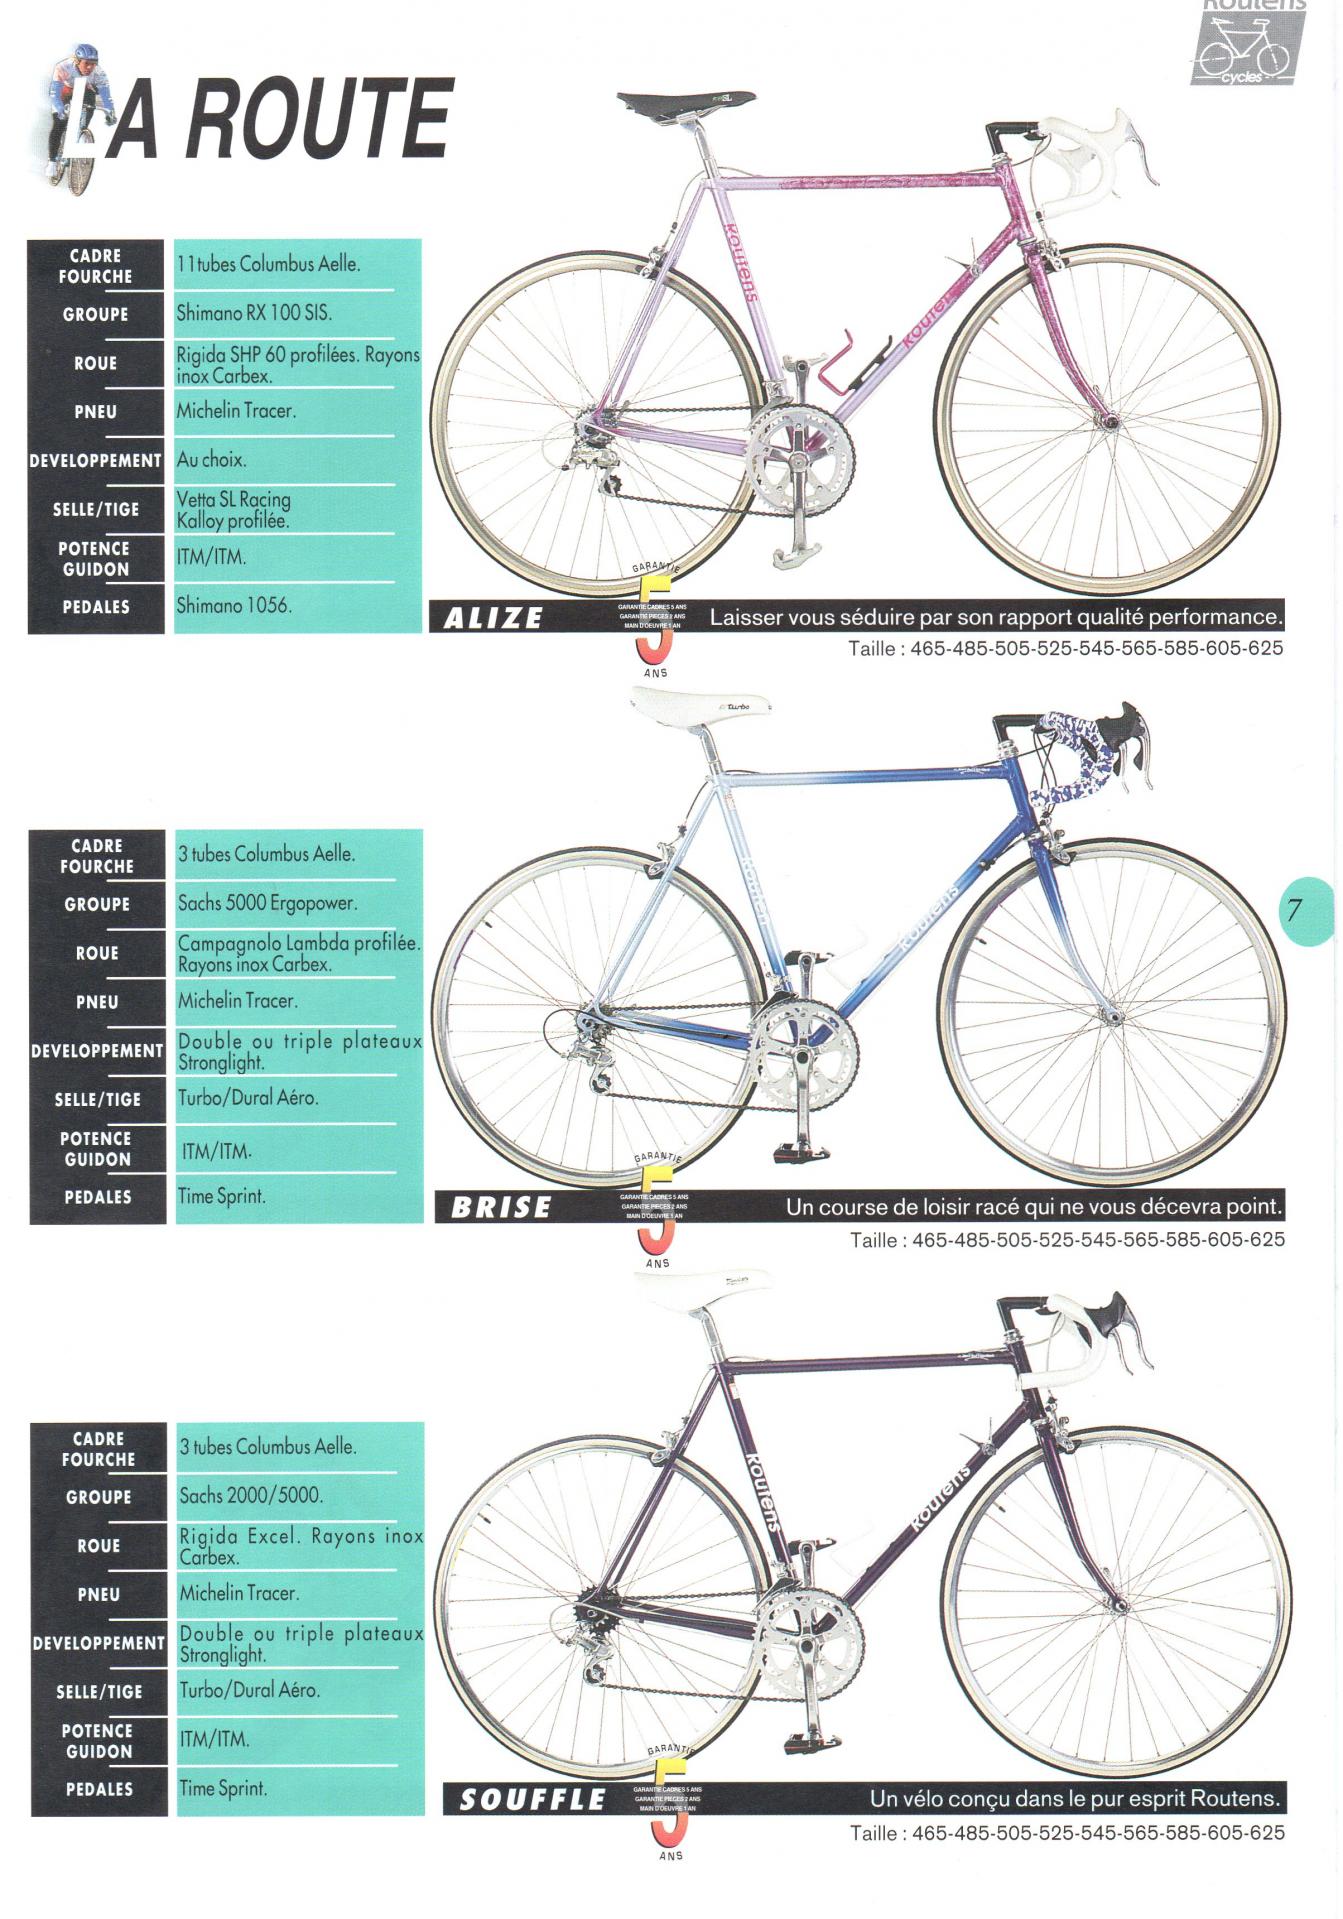 Routens cycles catalogue 1994 7